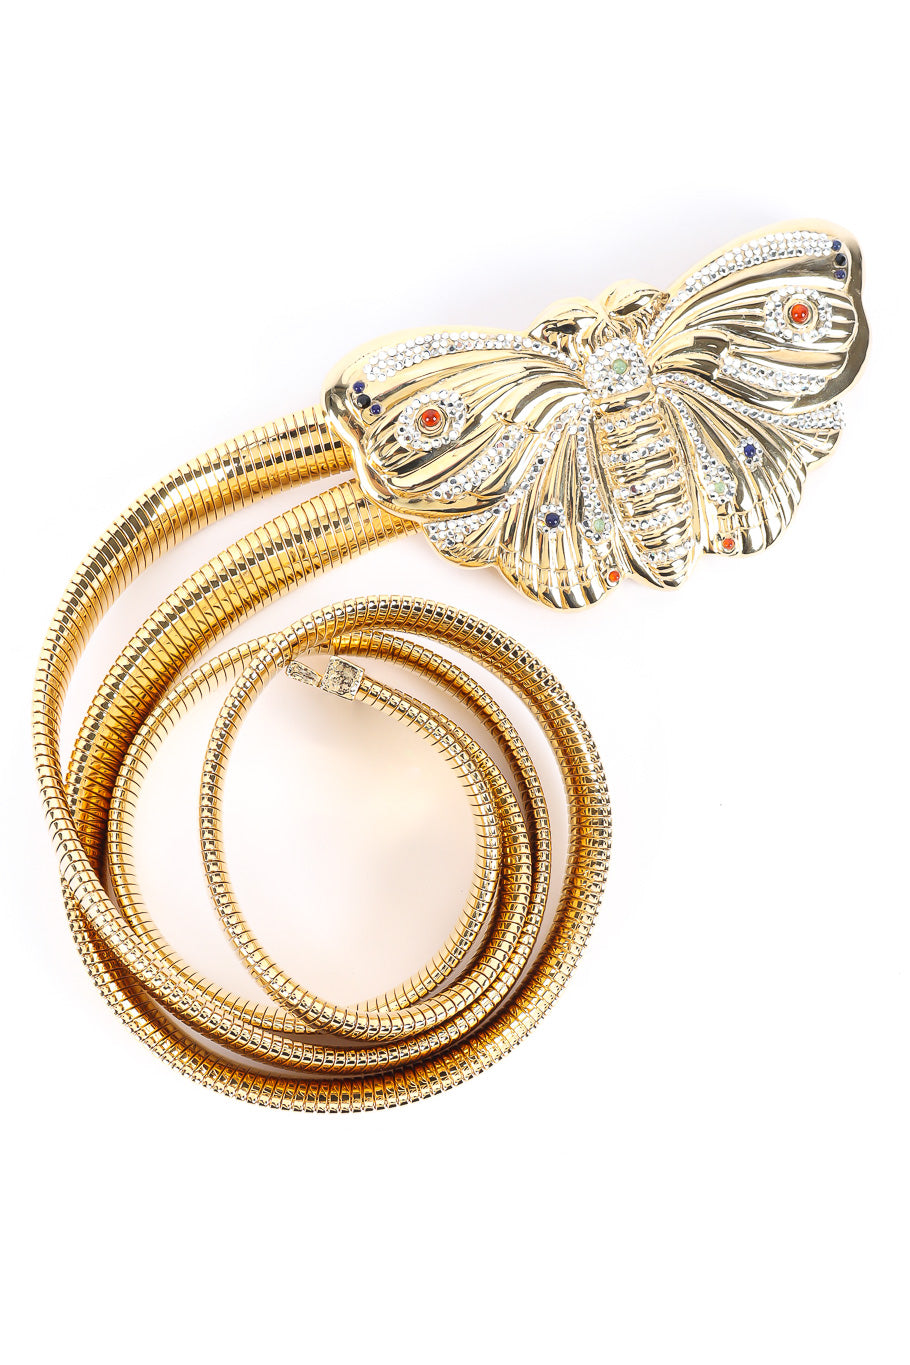 Jeweled butterfly belt by Judith Leiber Front View @recessla